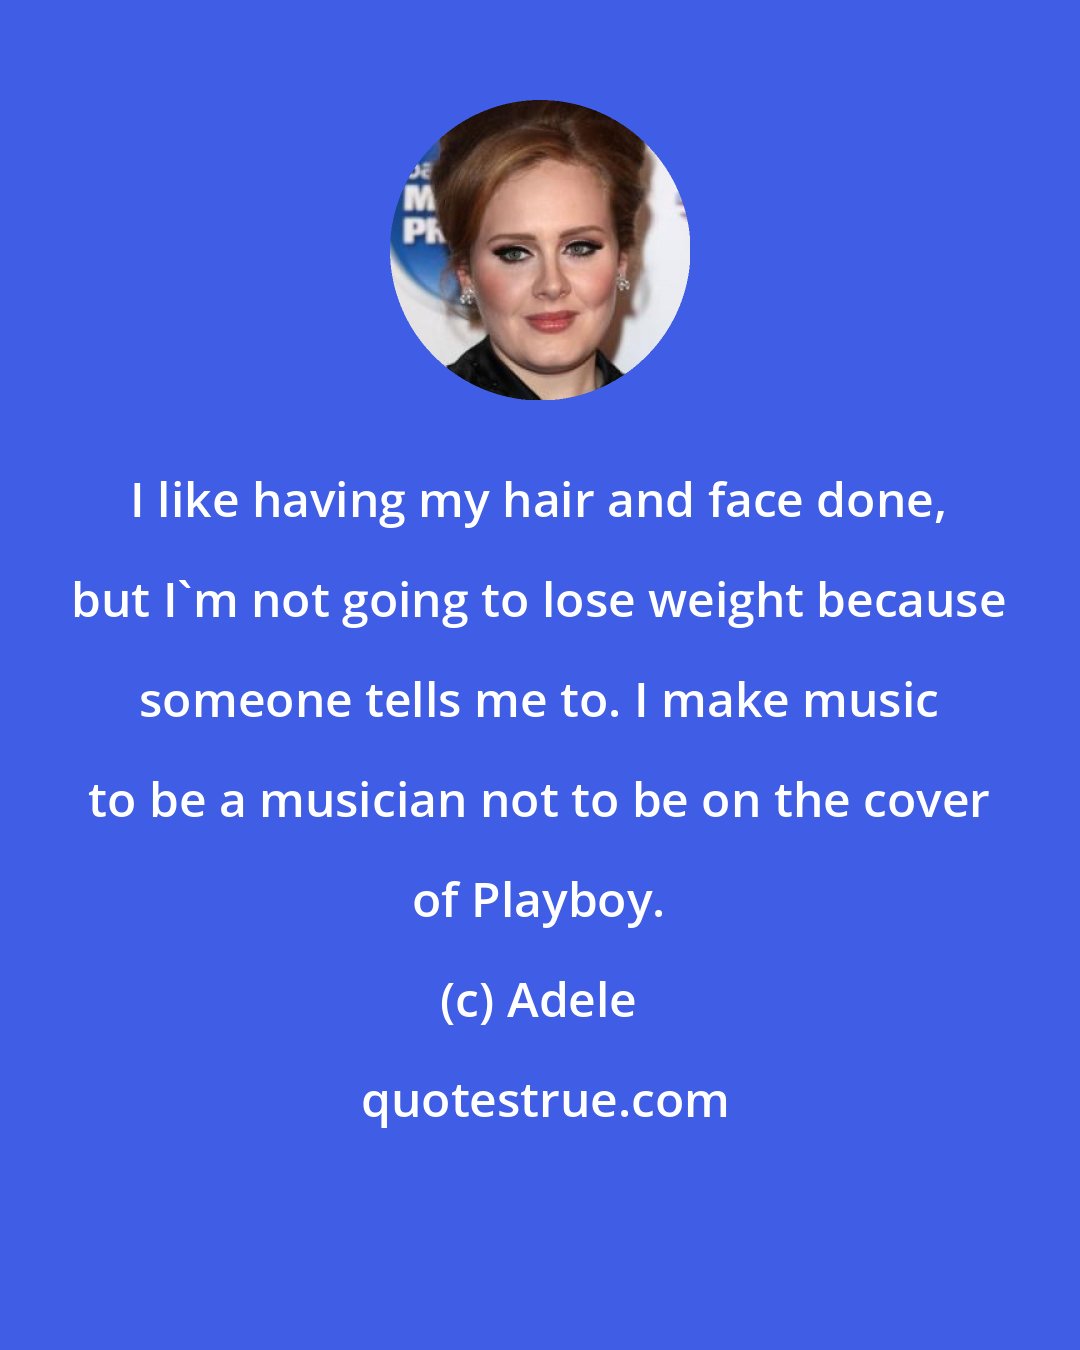 Adele: I like having my hair and face done, but I'm not going to lose weight because someone tells me to. I make music to be a musician not to be on the cover of Playboy.